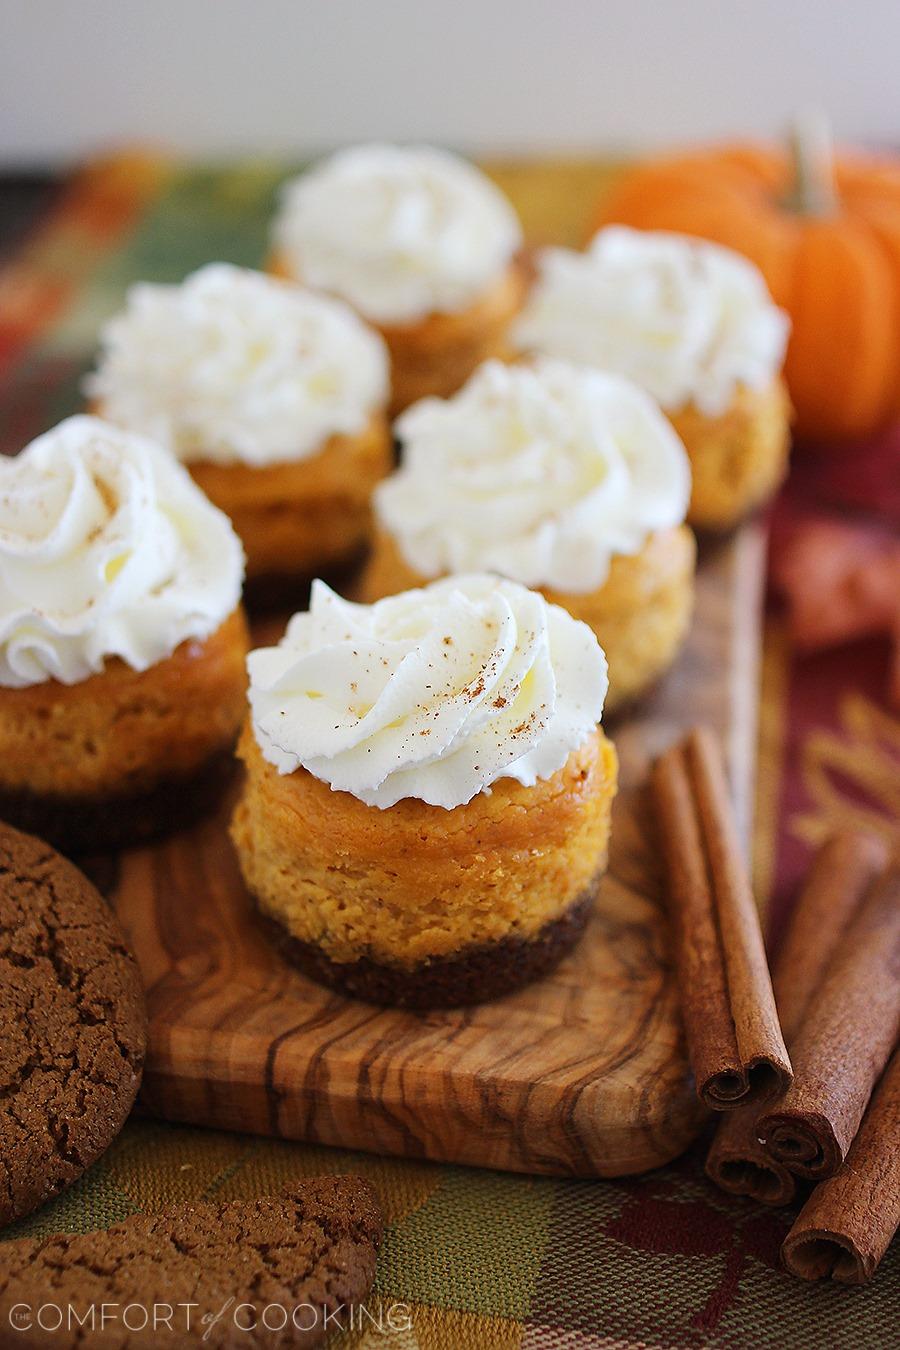 Mini Pumpkin Cheesecakes with Gingersnap Crusts – These creamy pumpkin cheesecakes with spiced gingersnap cookie crusts are to die for! | thecomfortofcooking.com